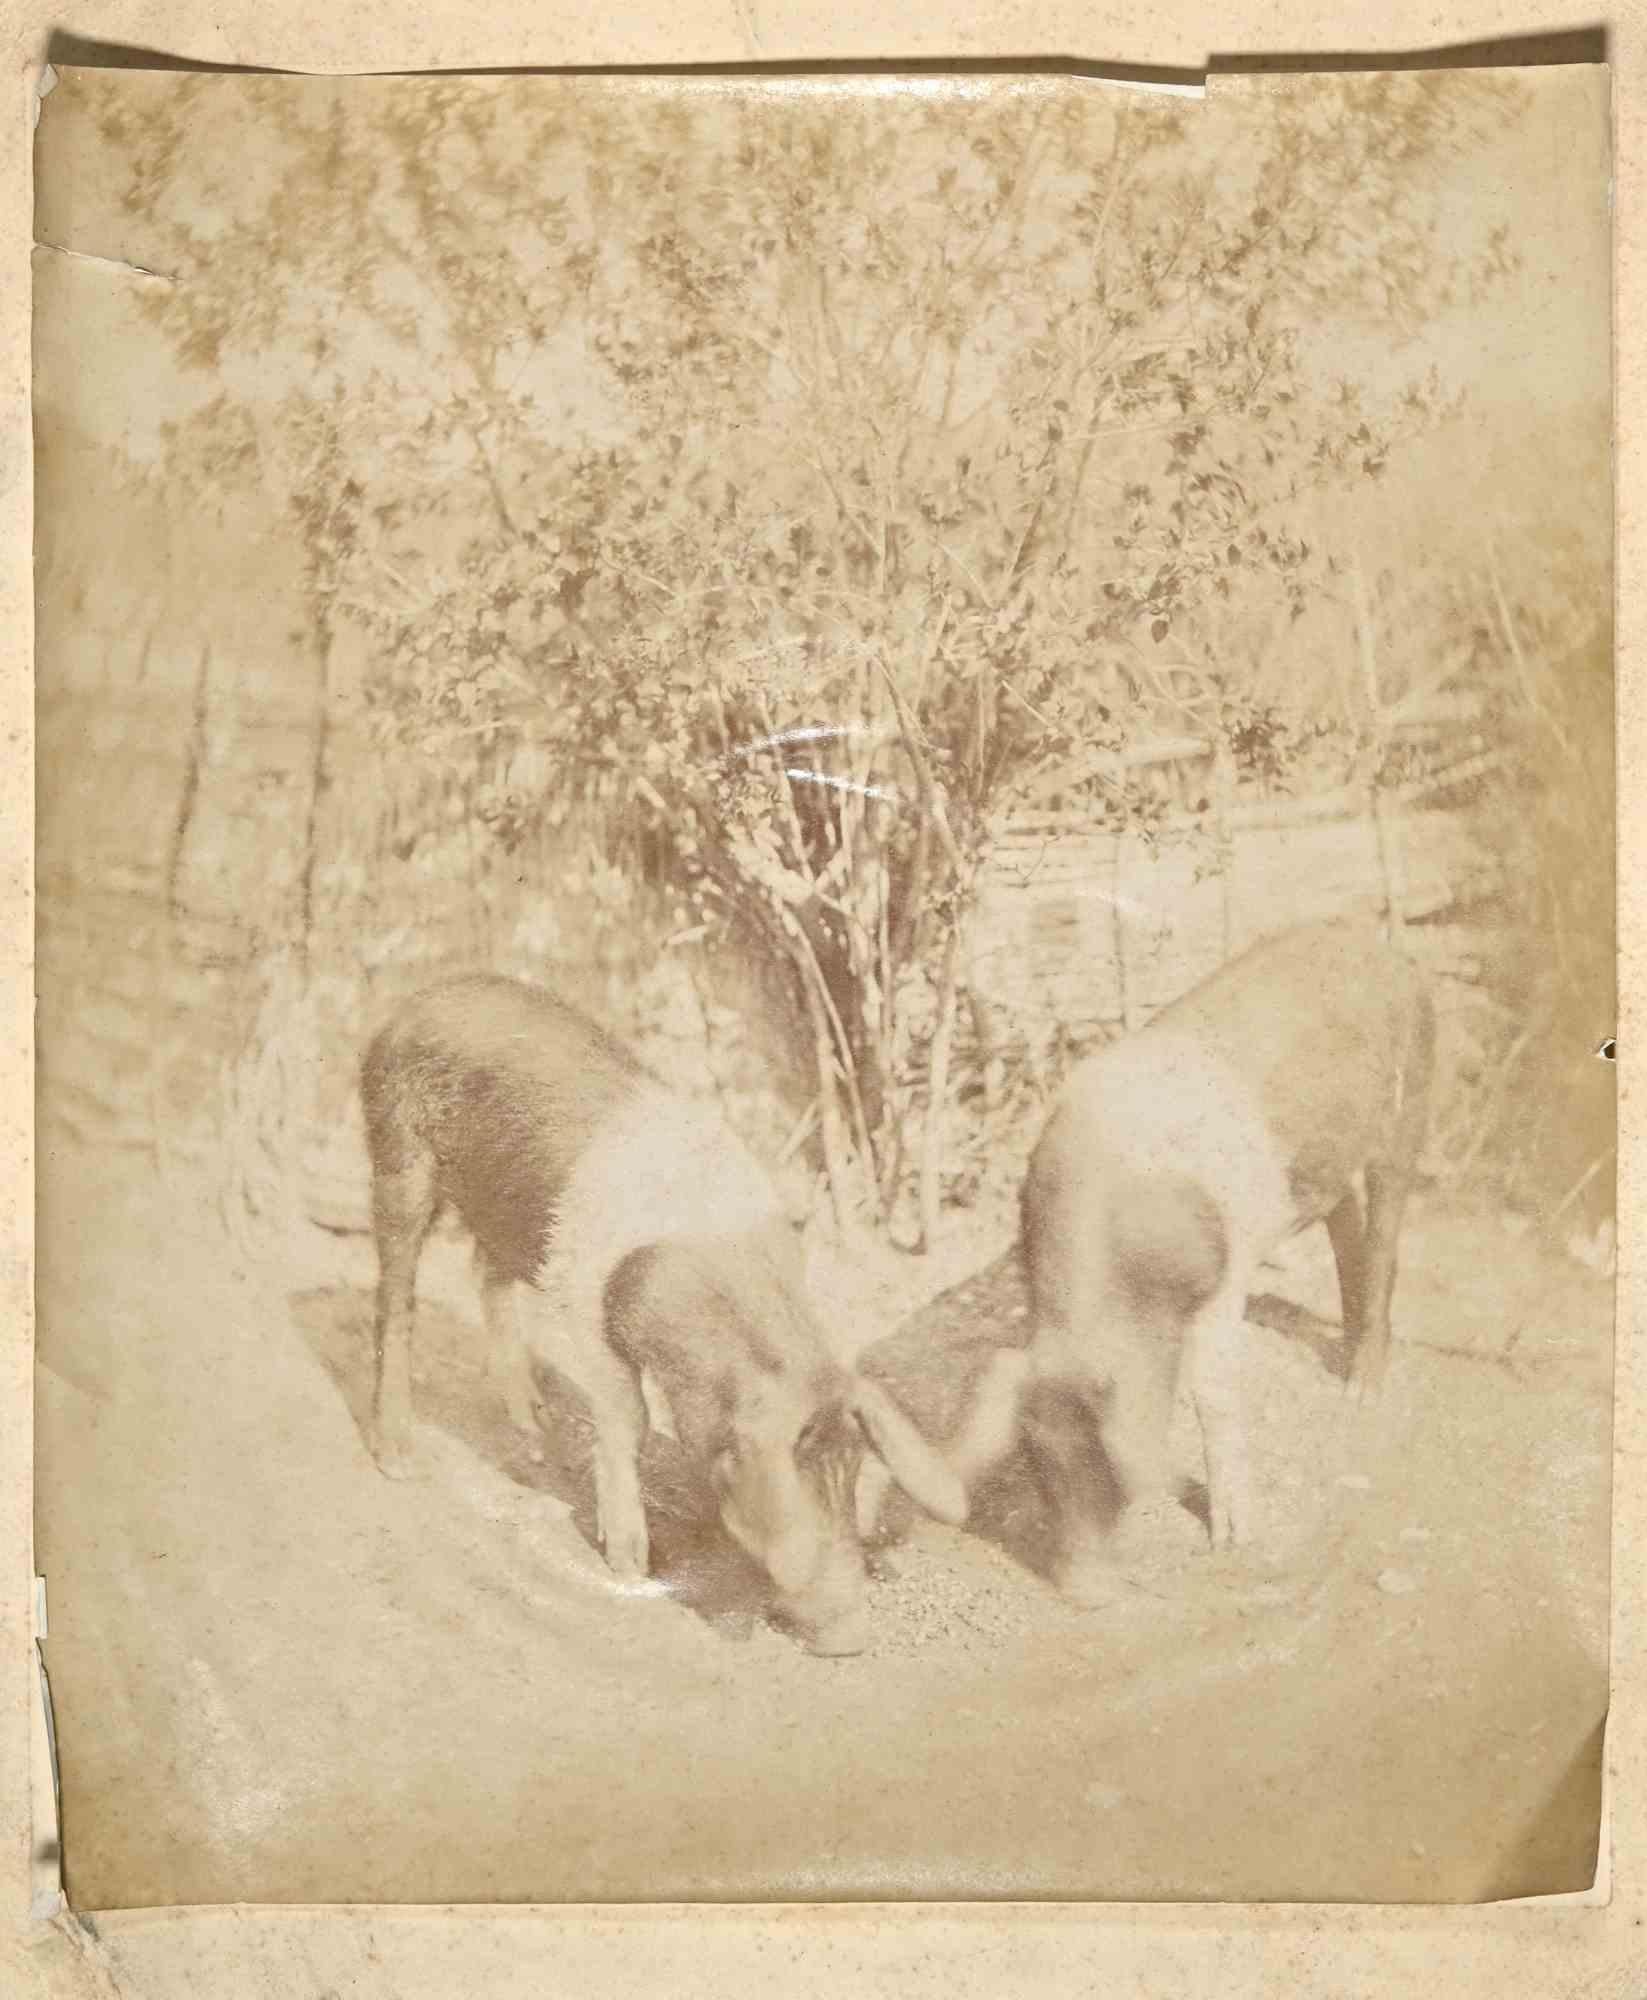 Unknown Figurative Photograph - Pigs - Vintage Photograph - Early 20th Century